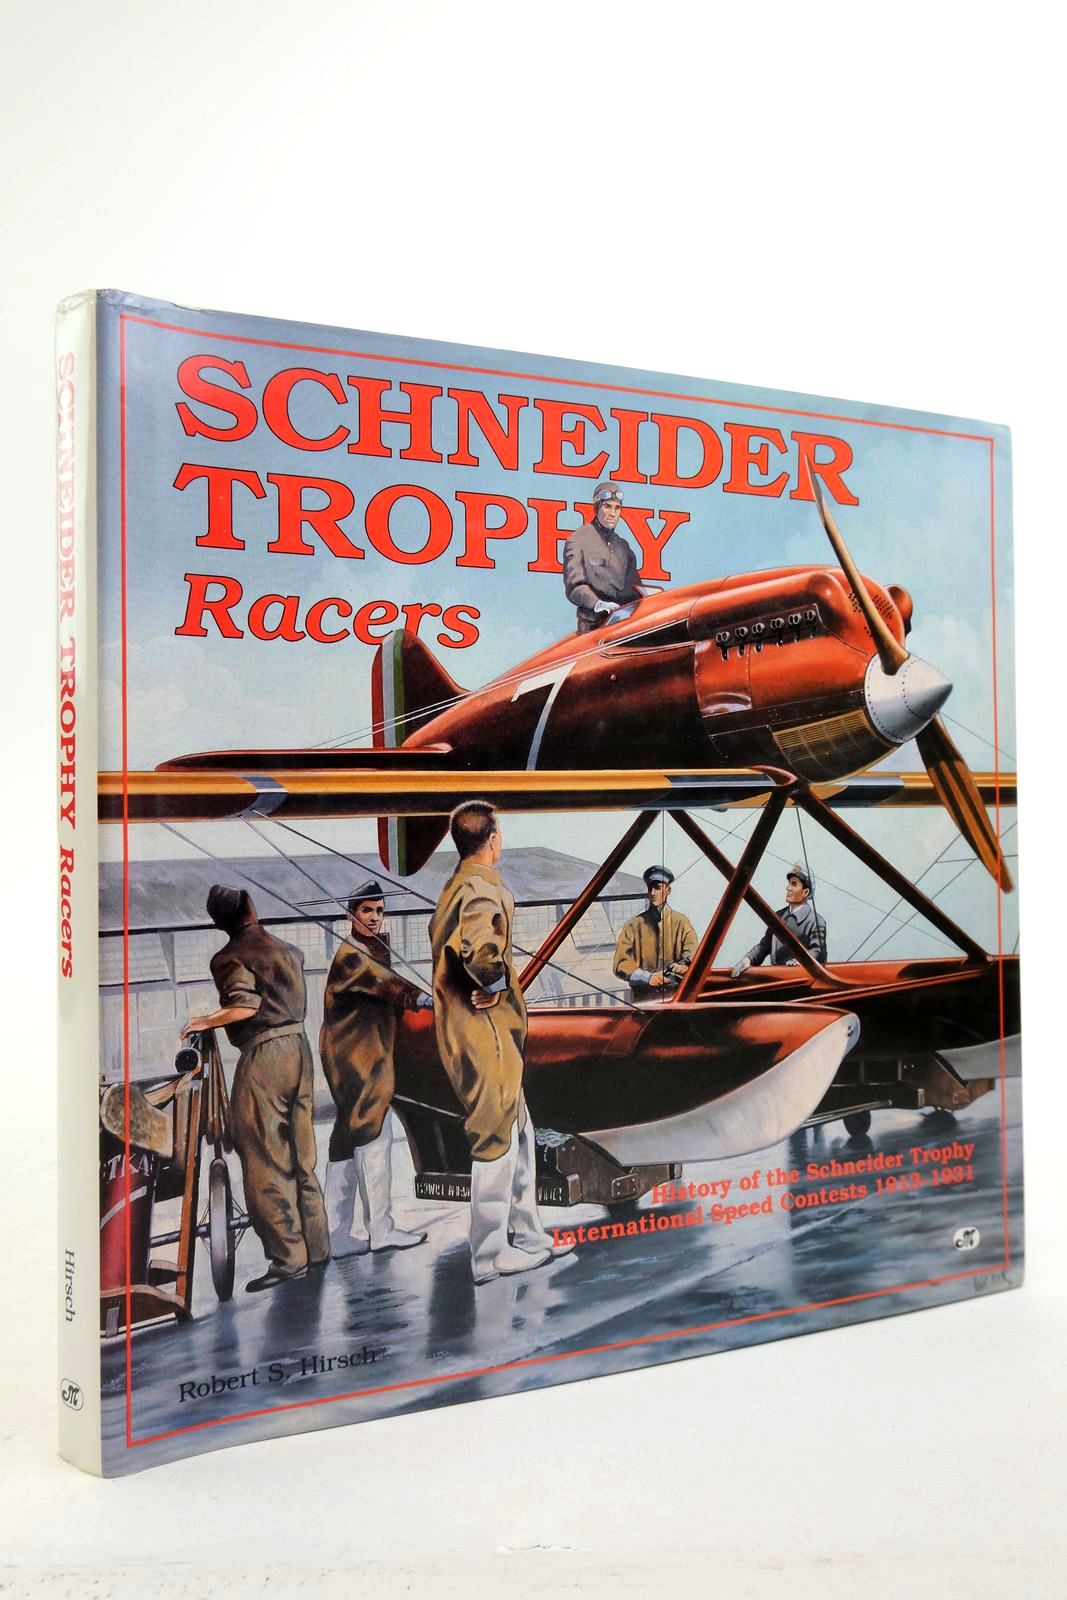 Photo of SCHNEIDER TROPHY RACERS written by Hirsch, Robert S. published by Motorbooks International (STOCK CODE: 2140190)  for sale by Stella & Rose's Books